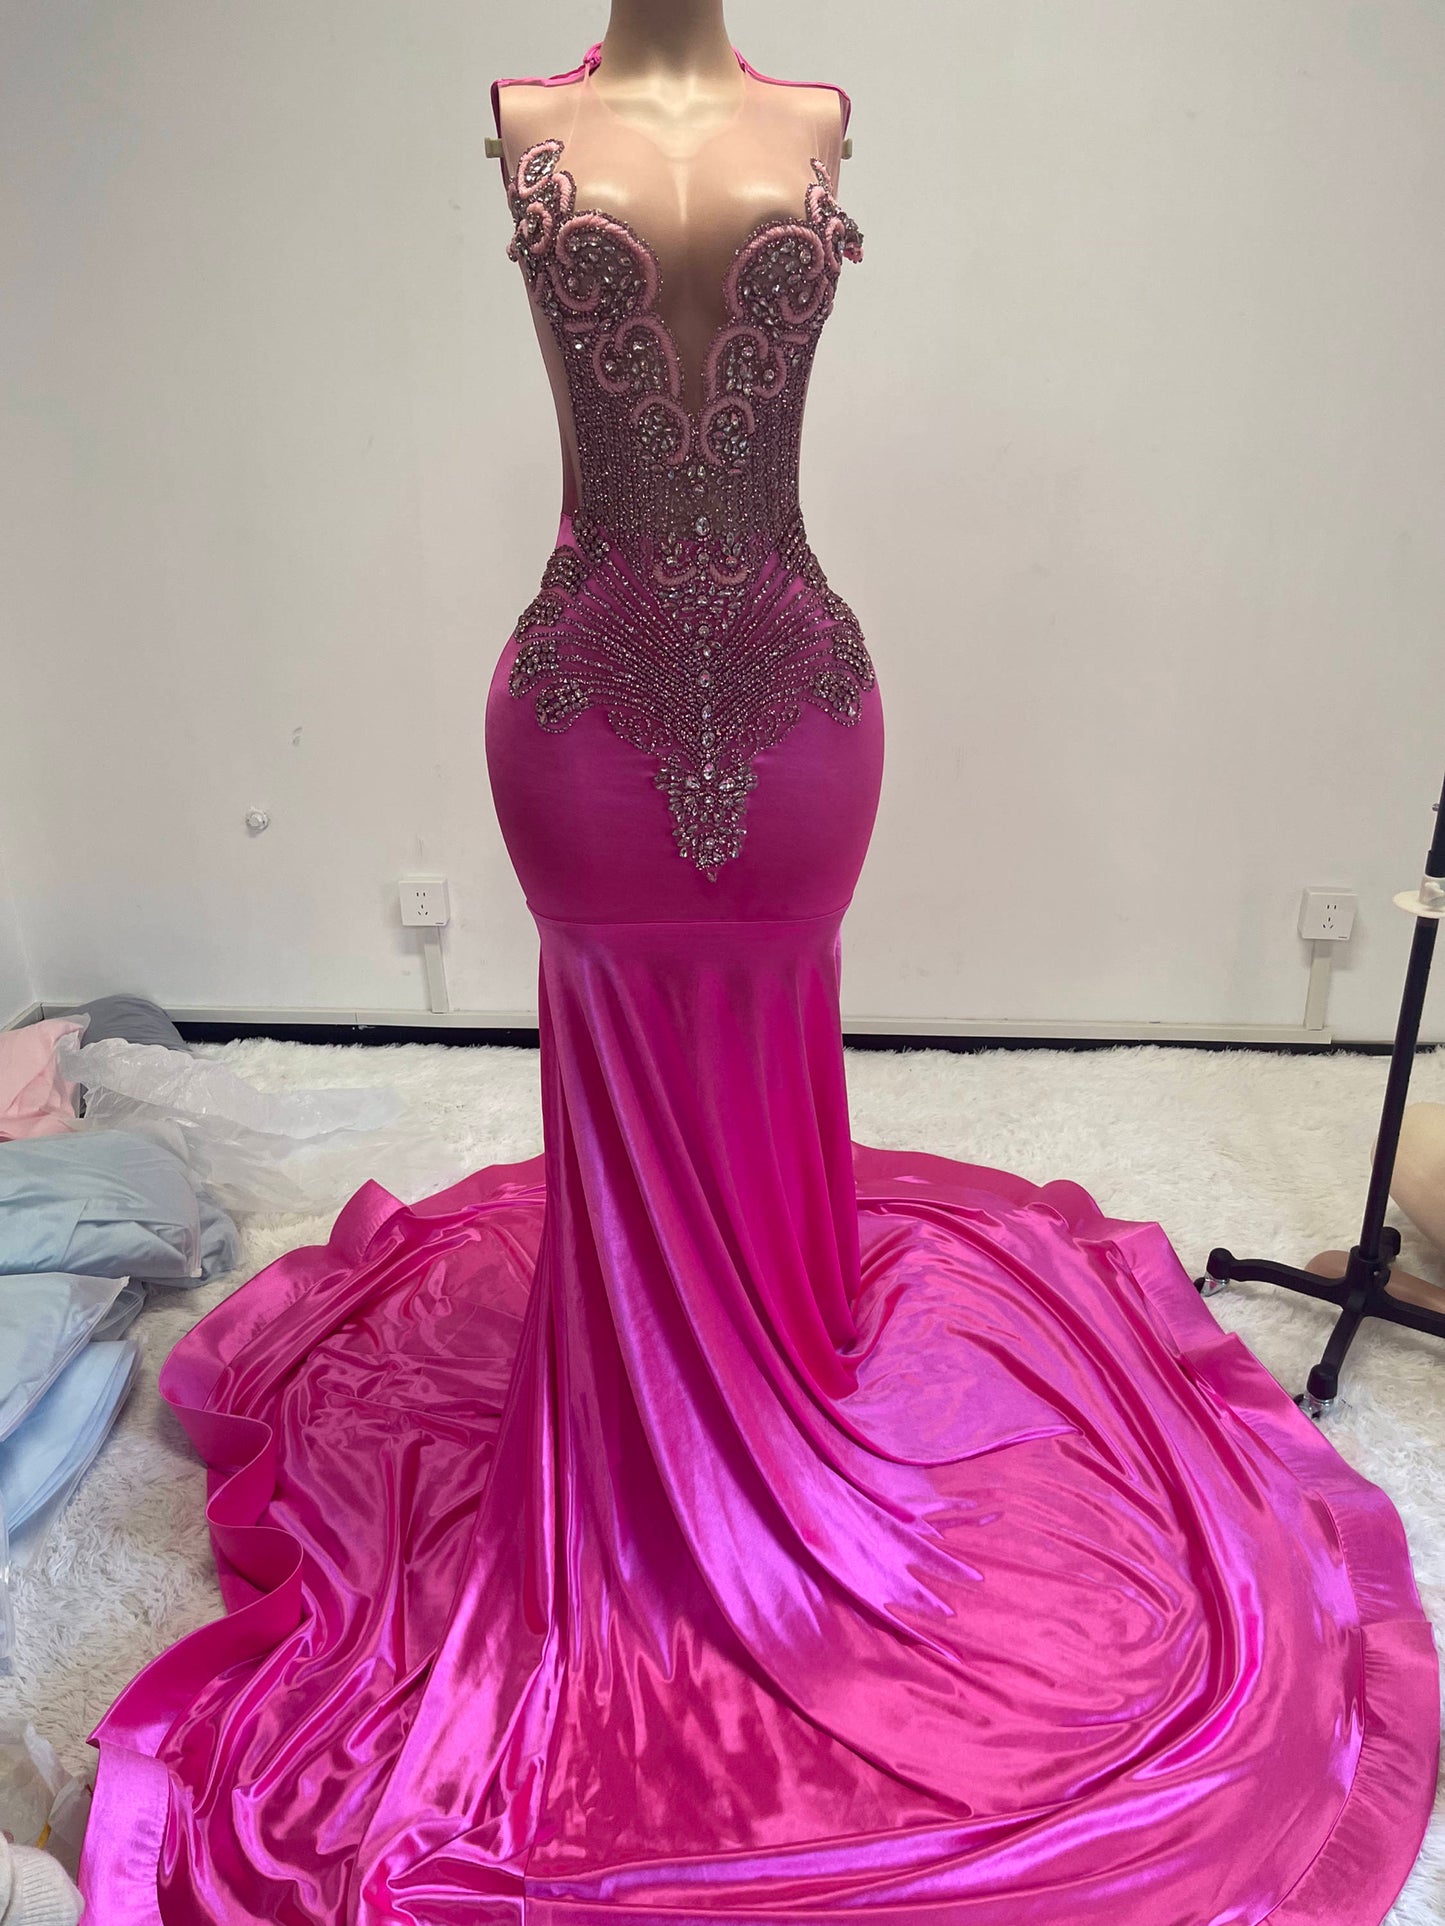 “Jewels” Gown